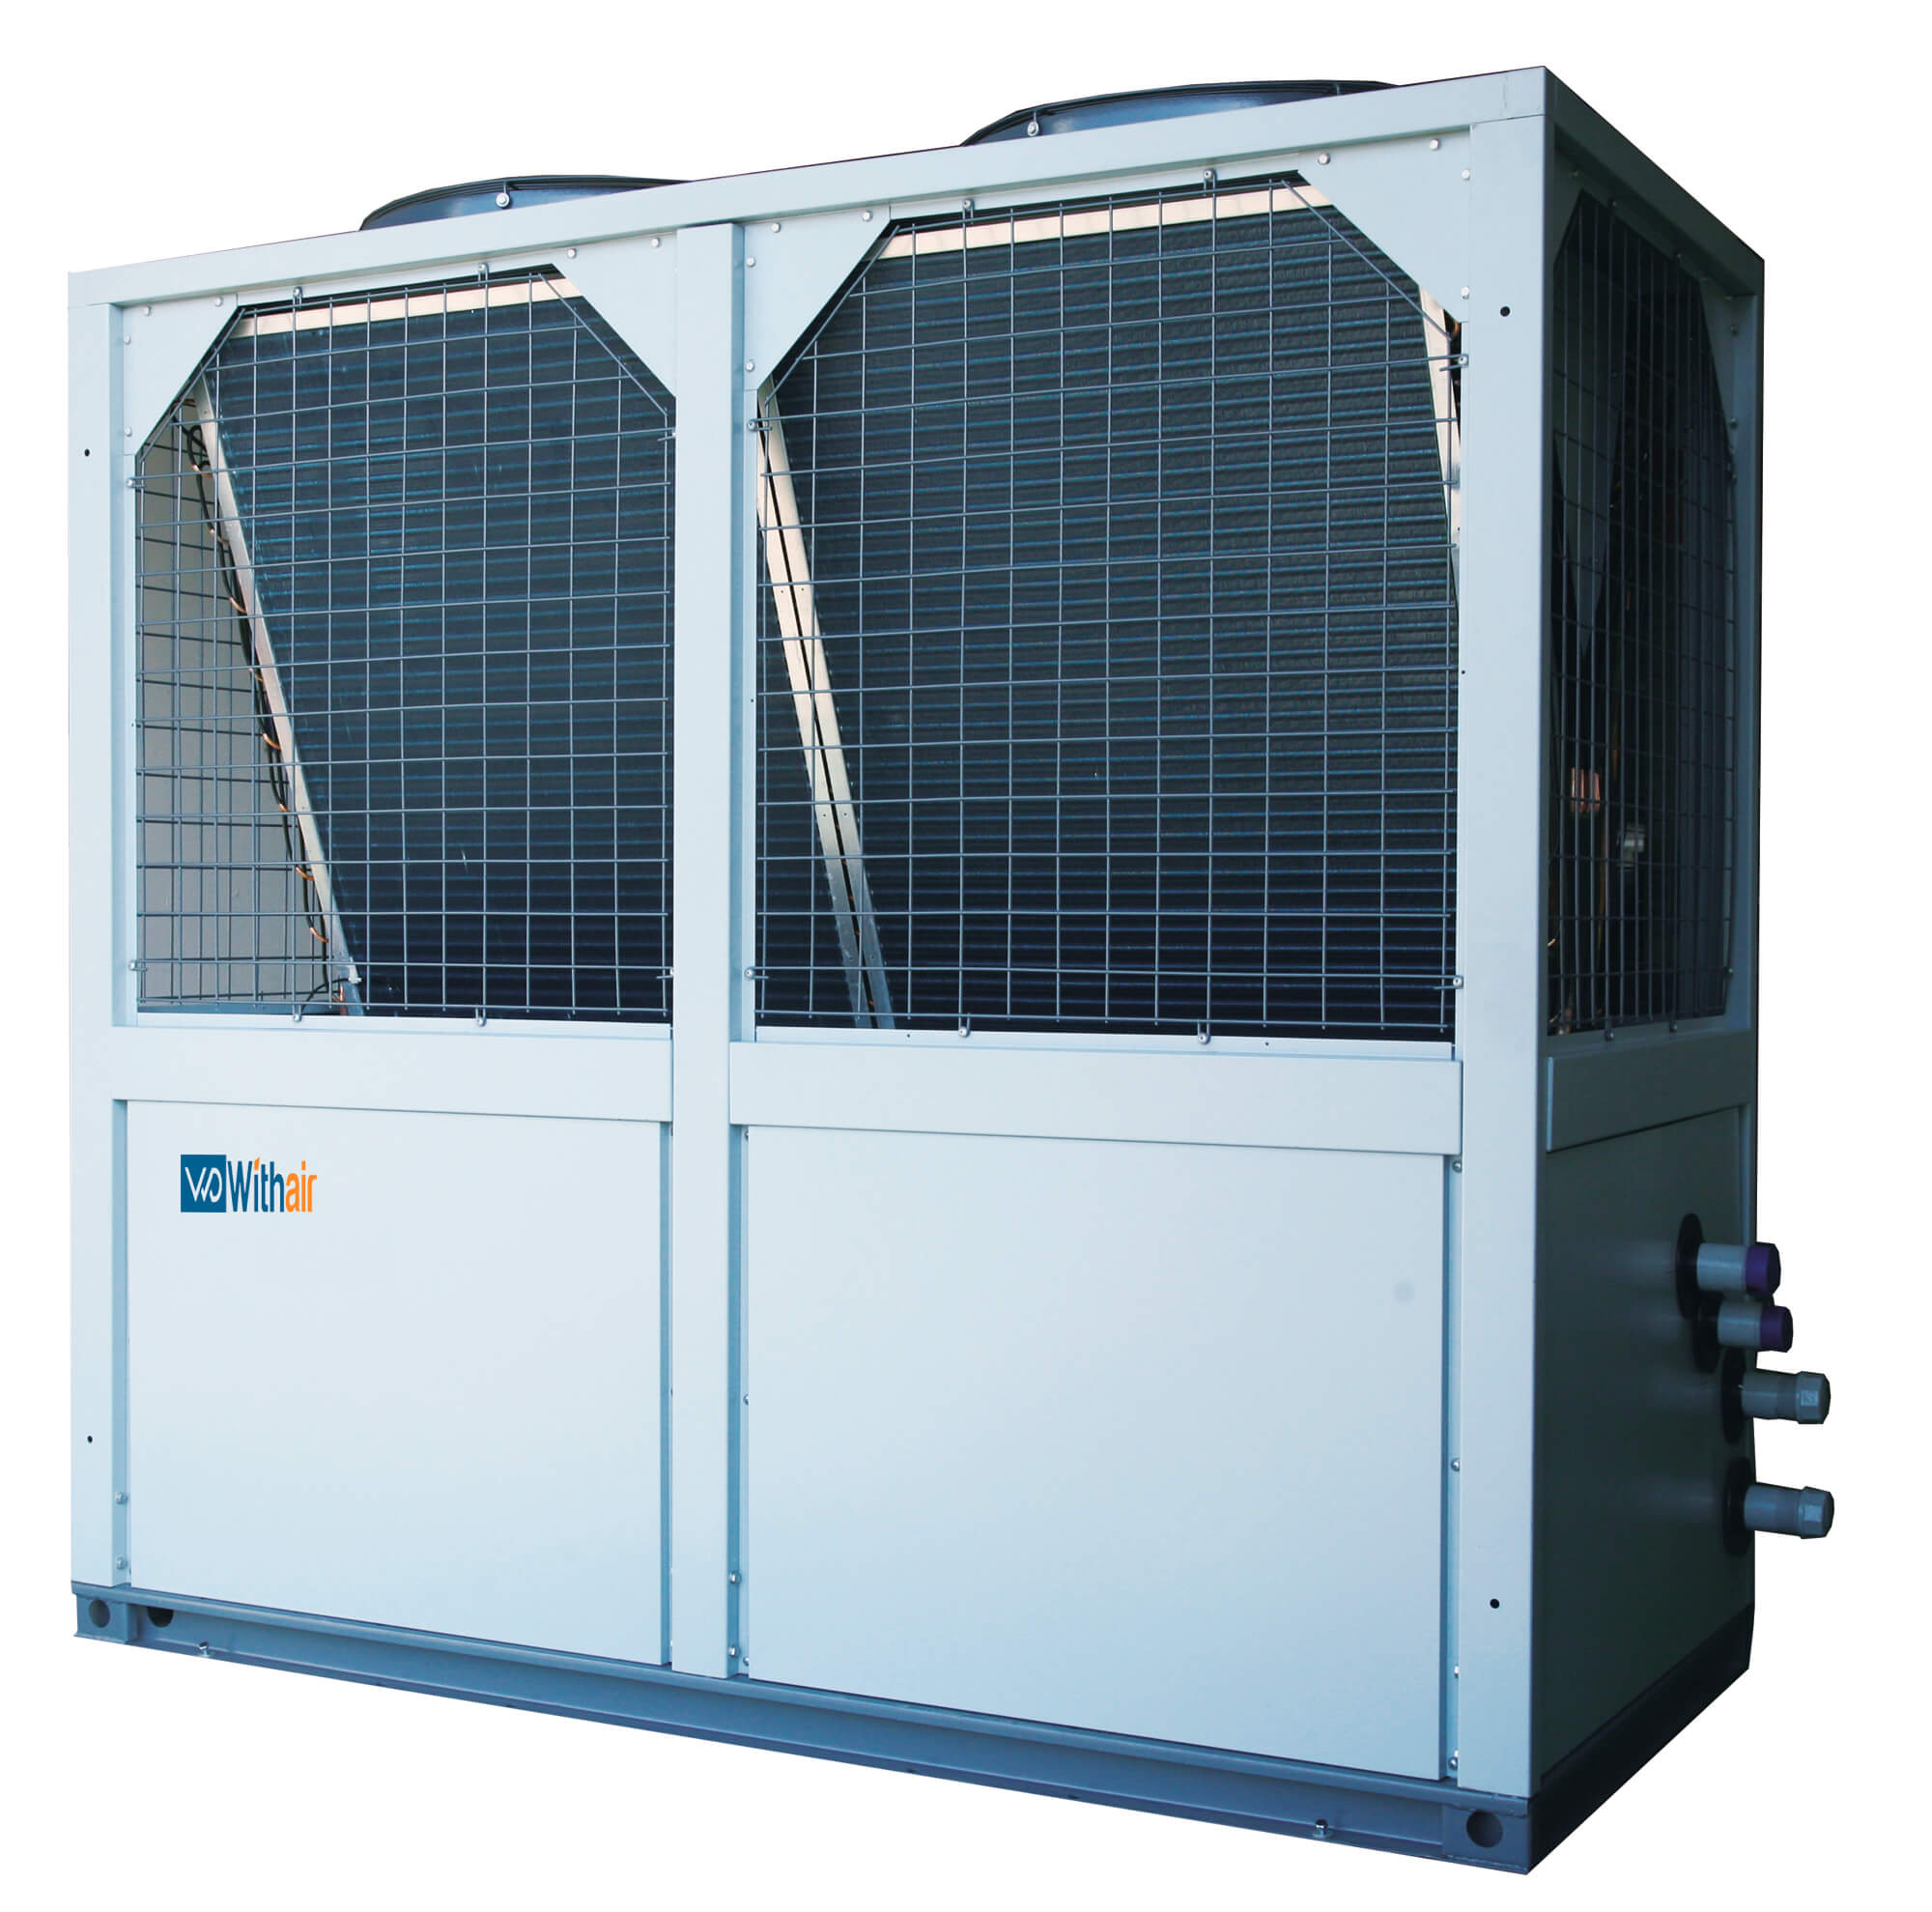  Scroll Compressor Air Cooled Water Chiller with Heat Recovery